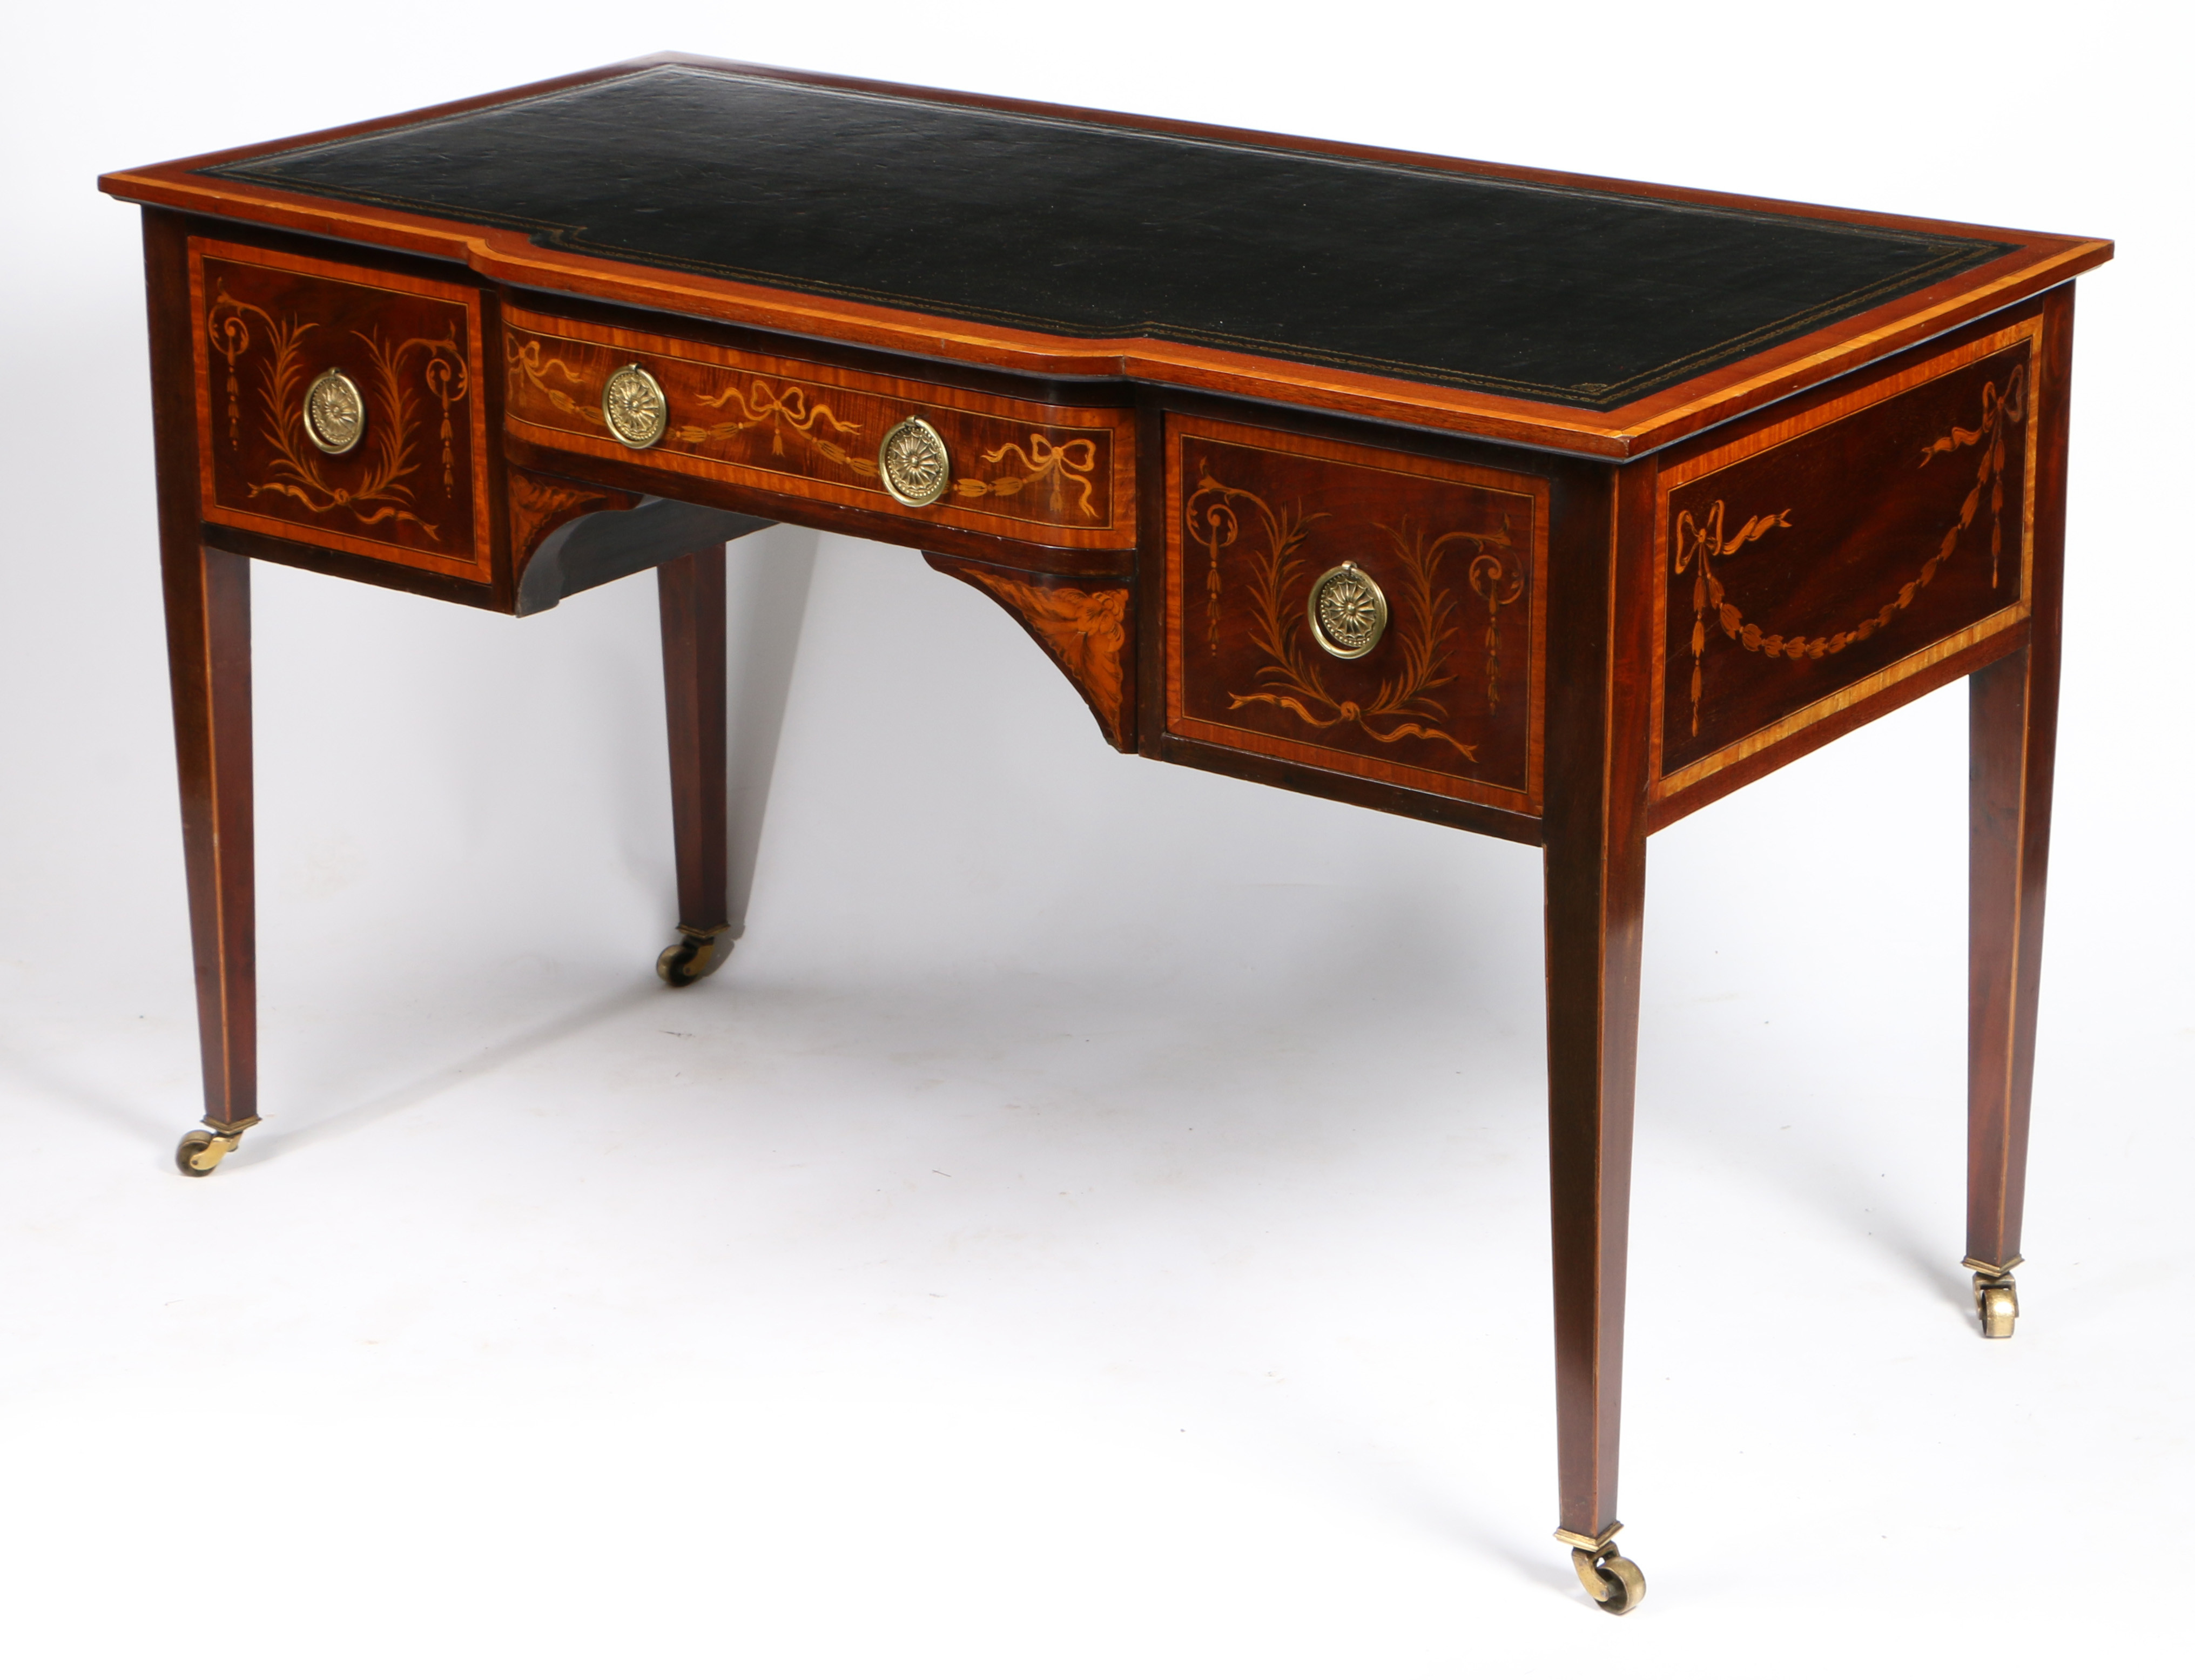 A 19TH CENTURY MAHOGANY AND SATINWOOD INLAID WRITING DESK, IN THE MANNER OF EDWARDS AND ROBERTS. - Image 3 of 4